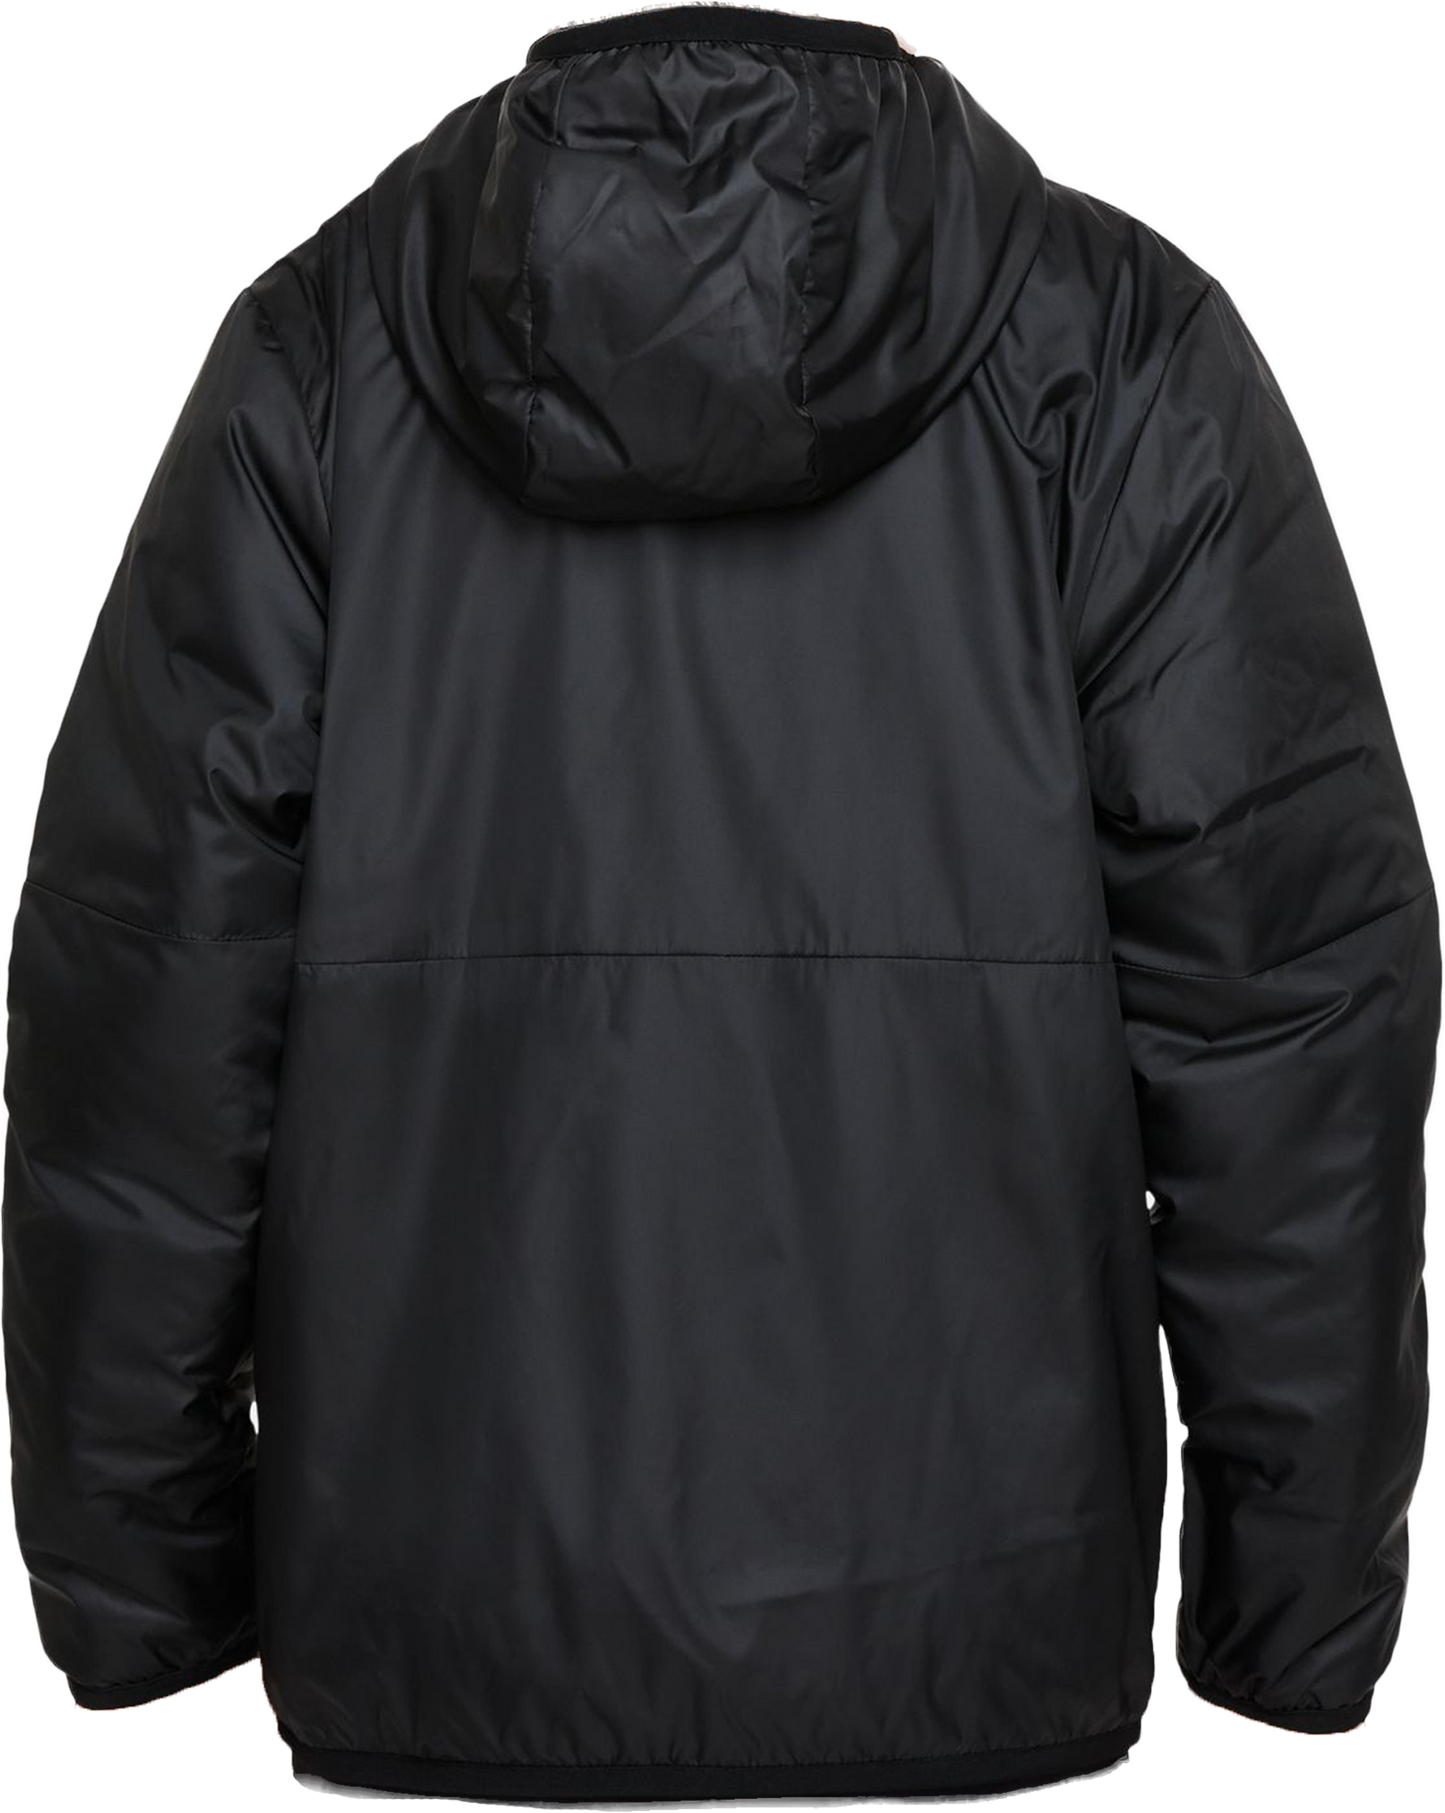 WUFC Therma Repel Jacket [Youth]